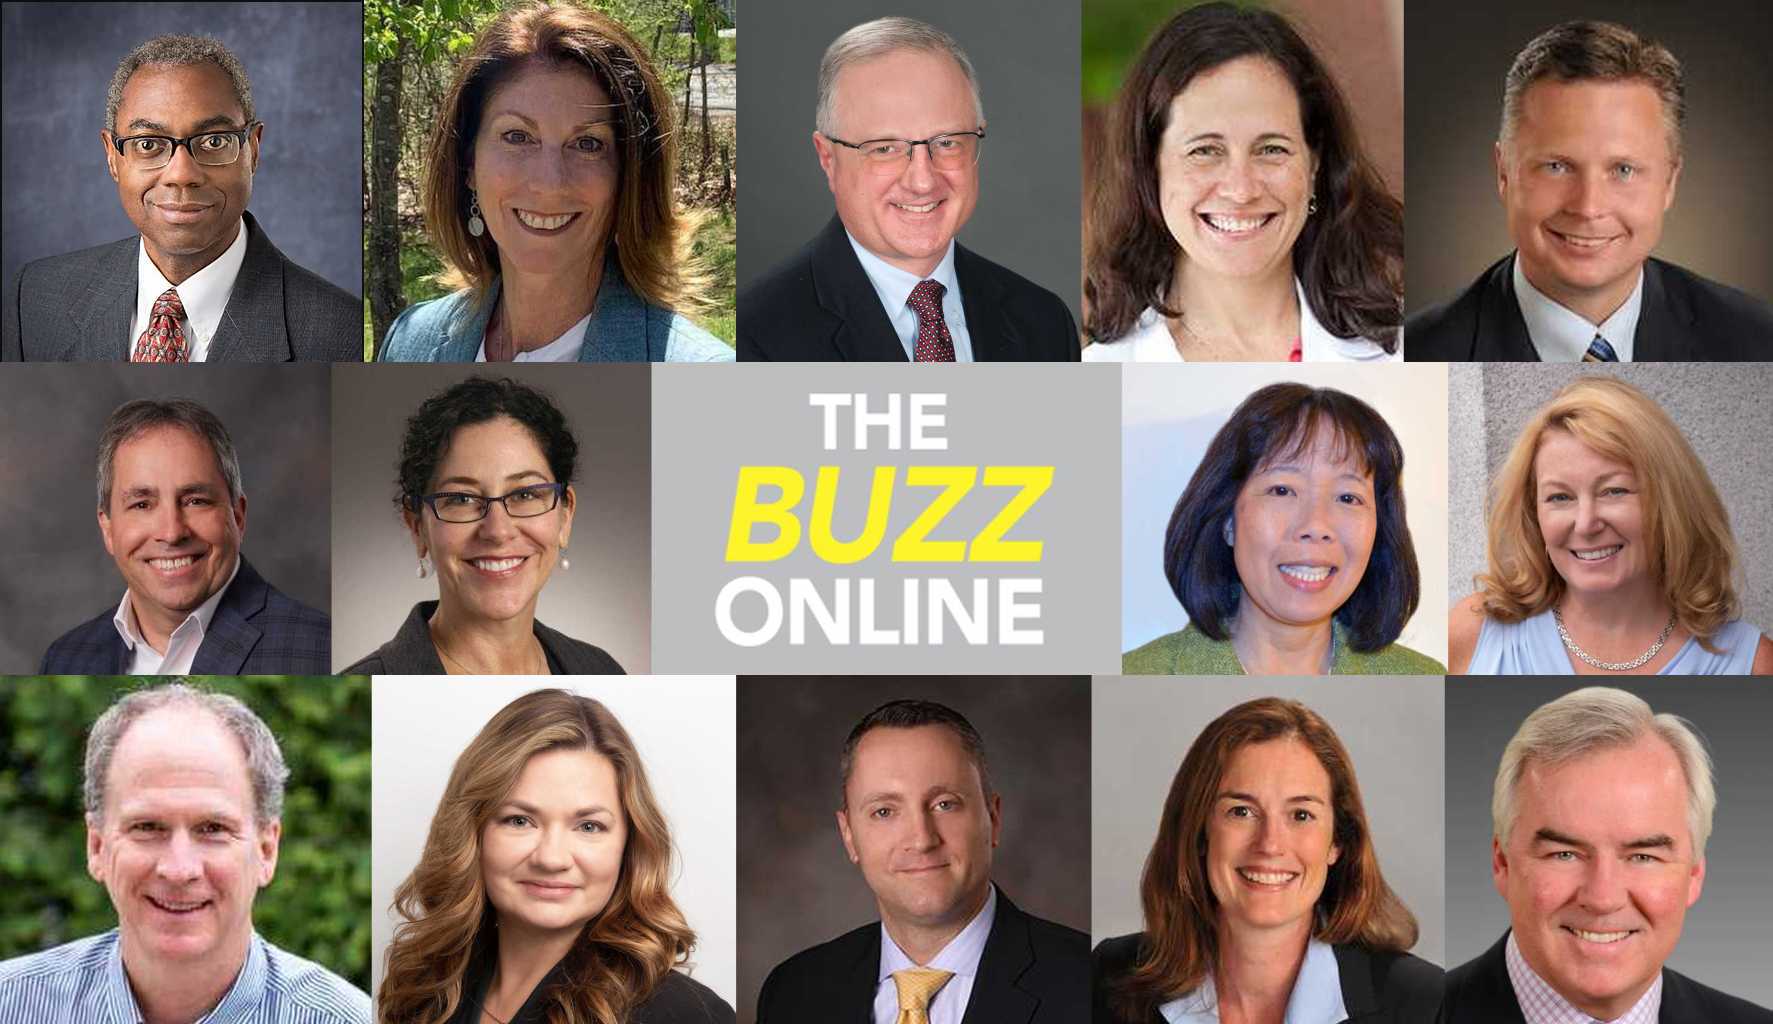 The Buzz Online